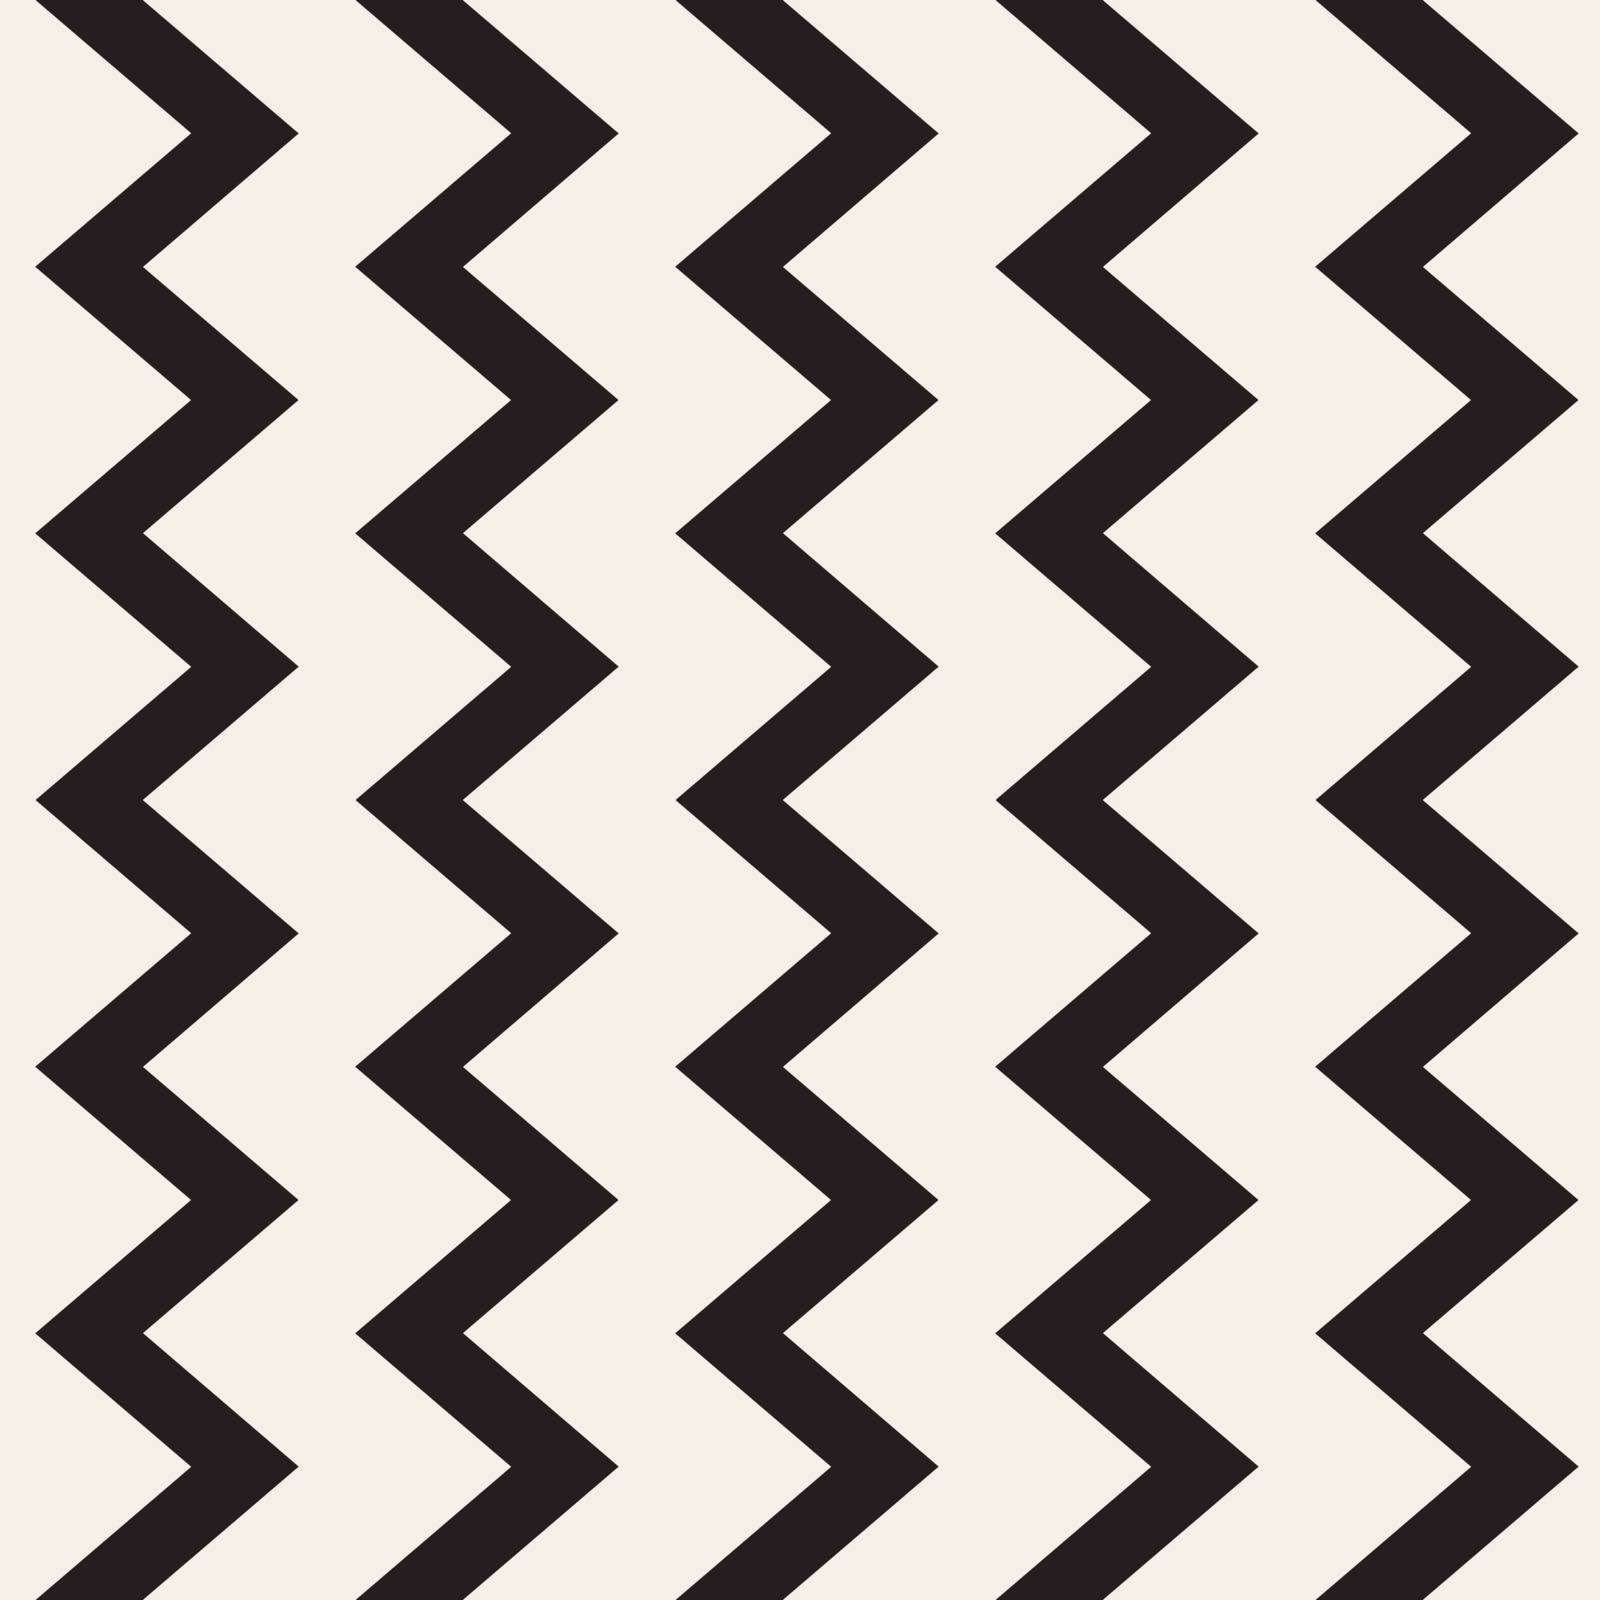 Vector Seamless Black and White ZigZag Lines Geometric Pattern. Abstract Geometric Background Design